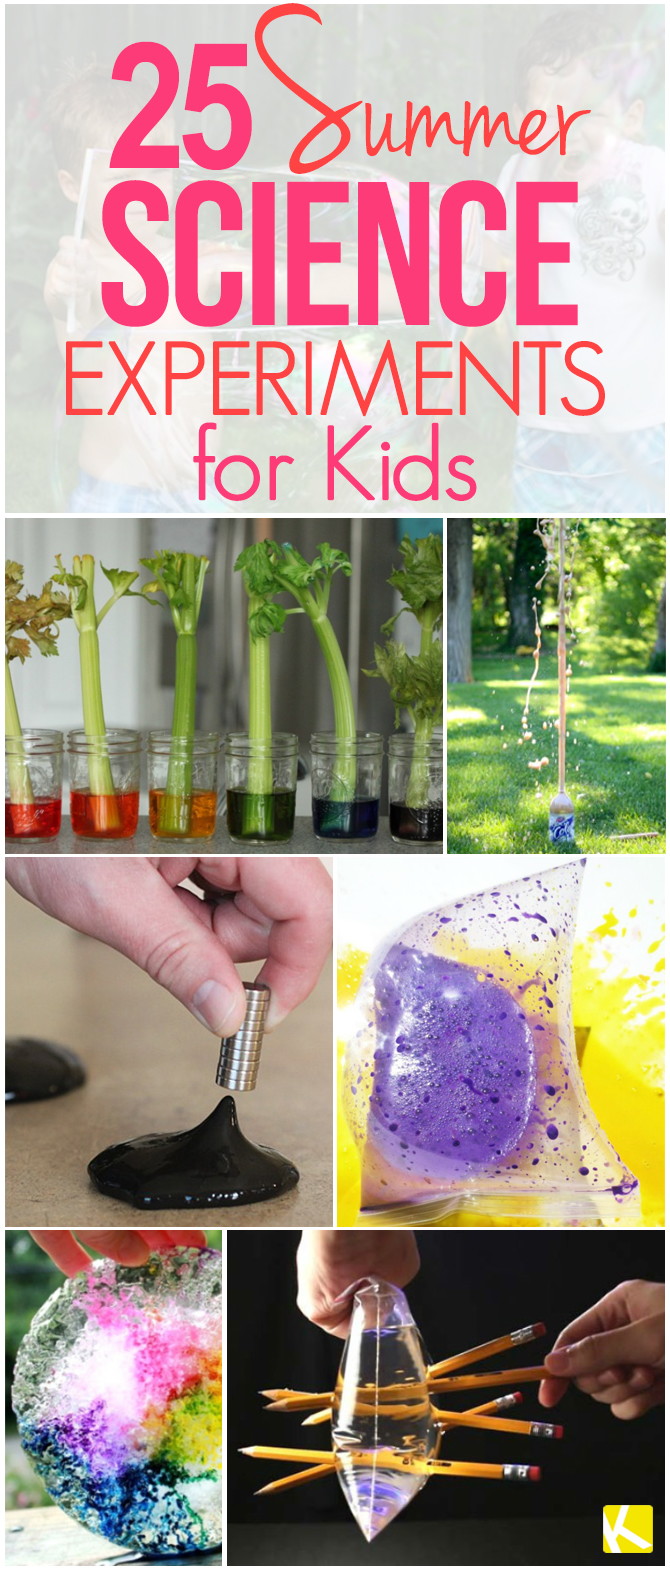 24 Easy Summer Science Experiments for Kids - The Krazy Coupon Lady